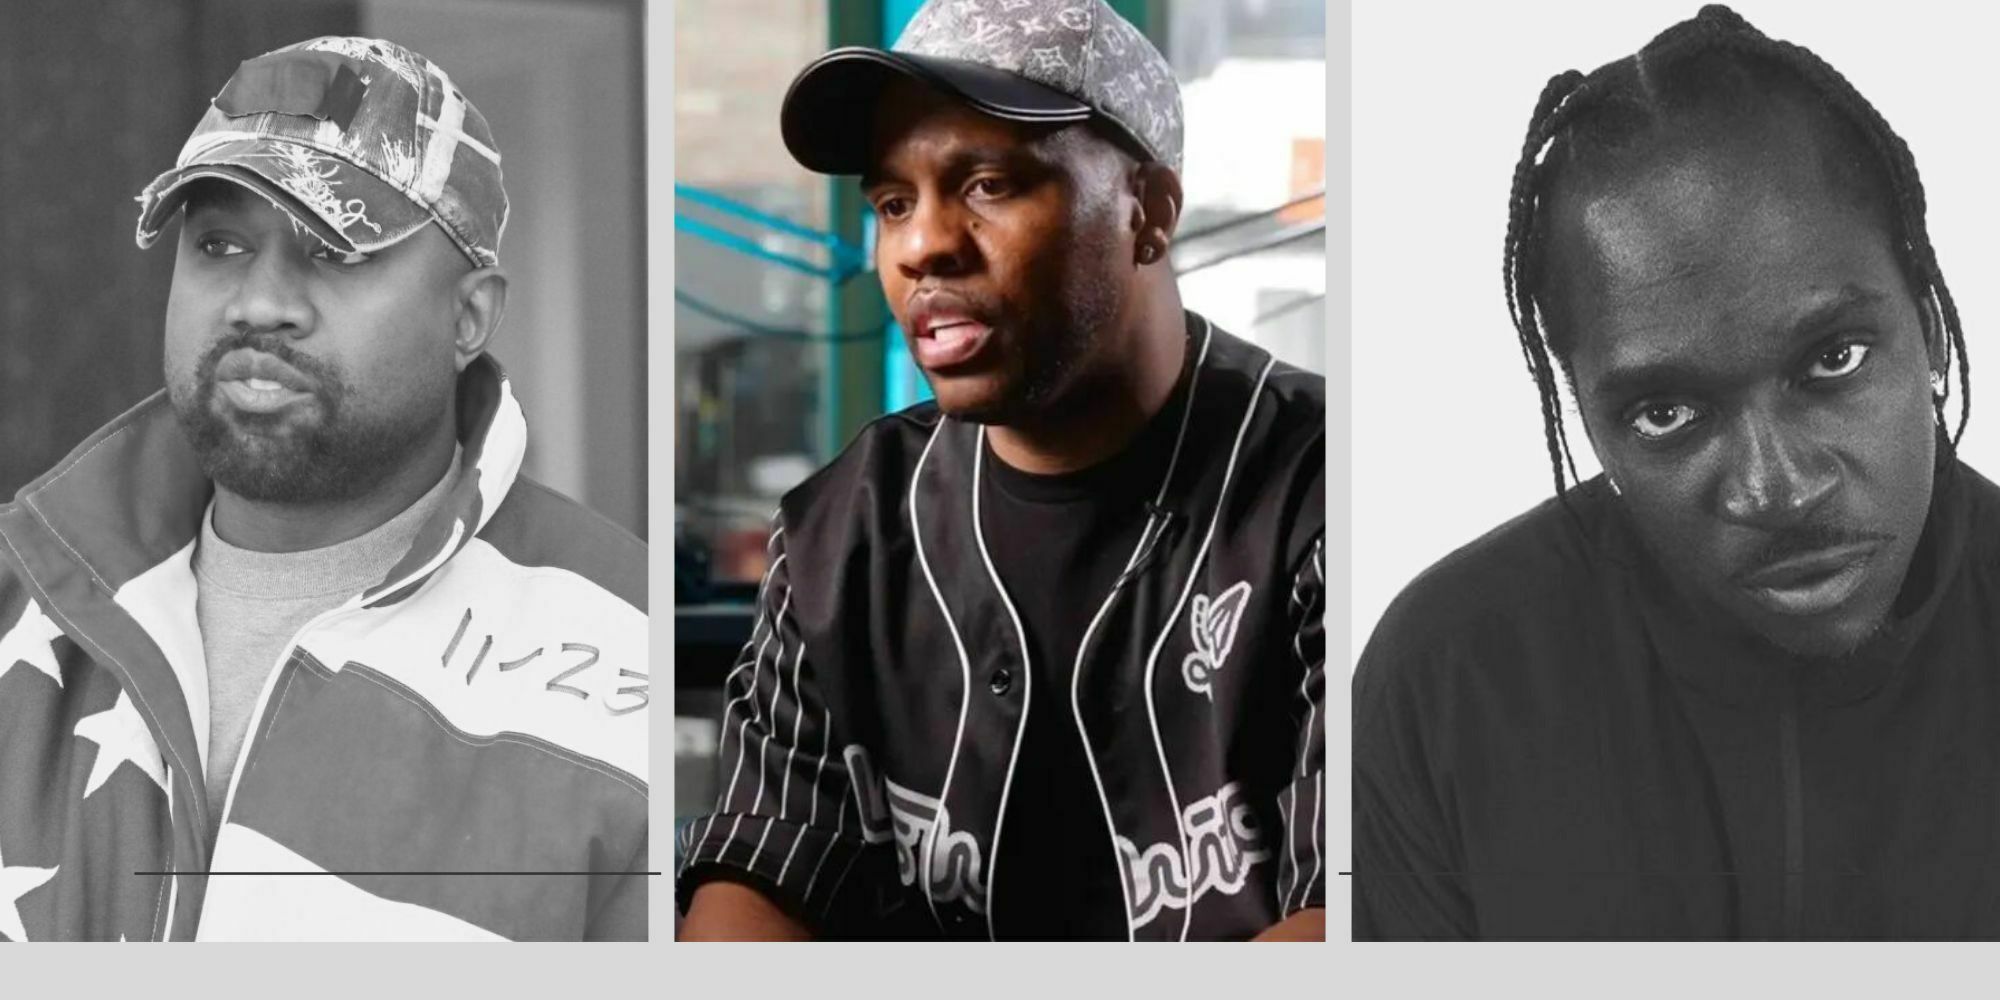 Consequence, Kanye West and Pusha T